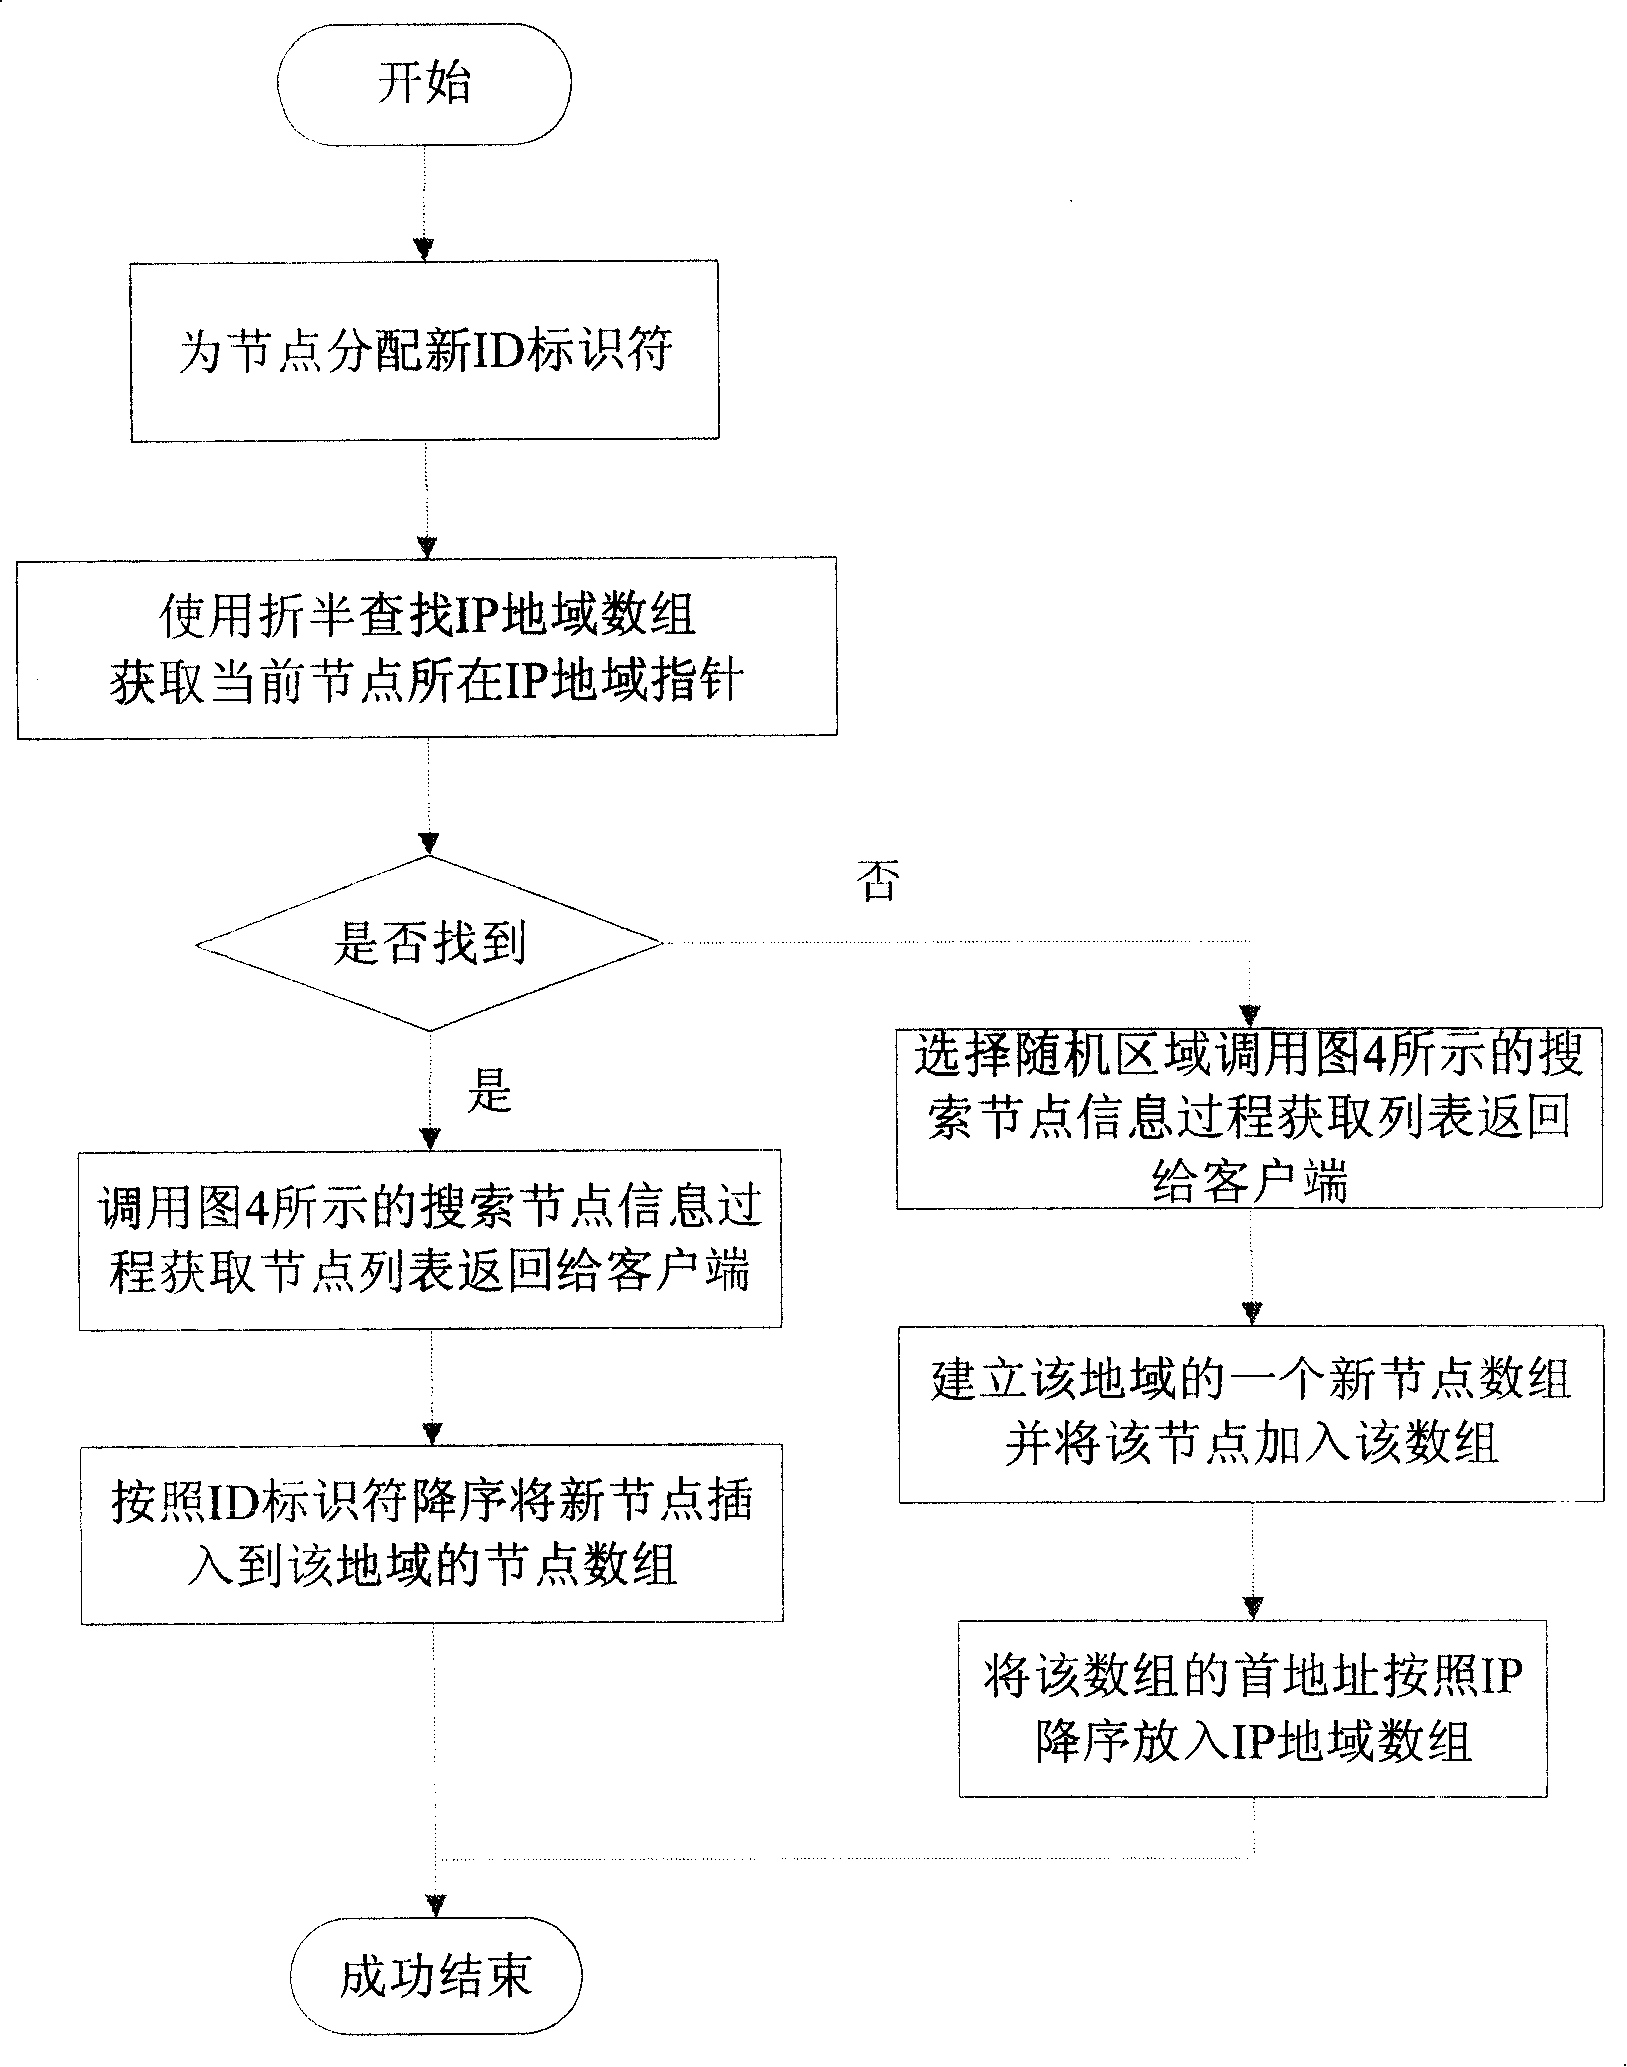 Overal-node maitaining method in reciprocal network